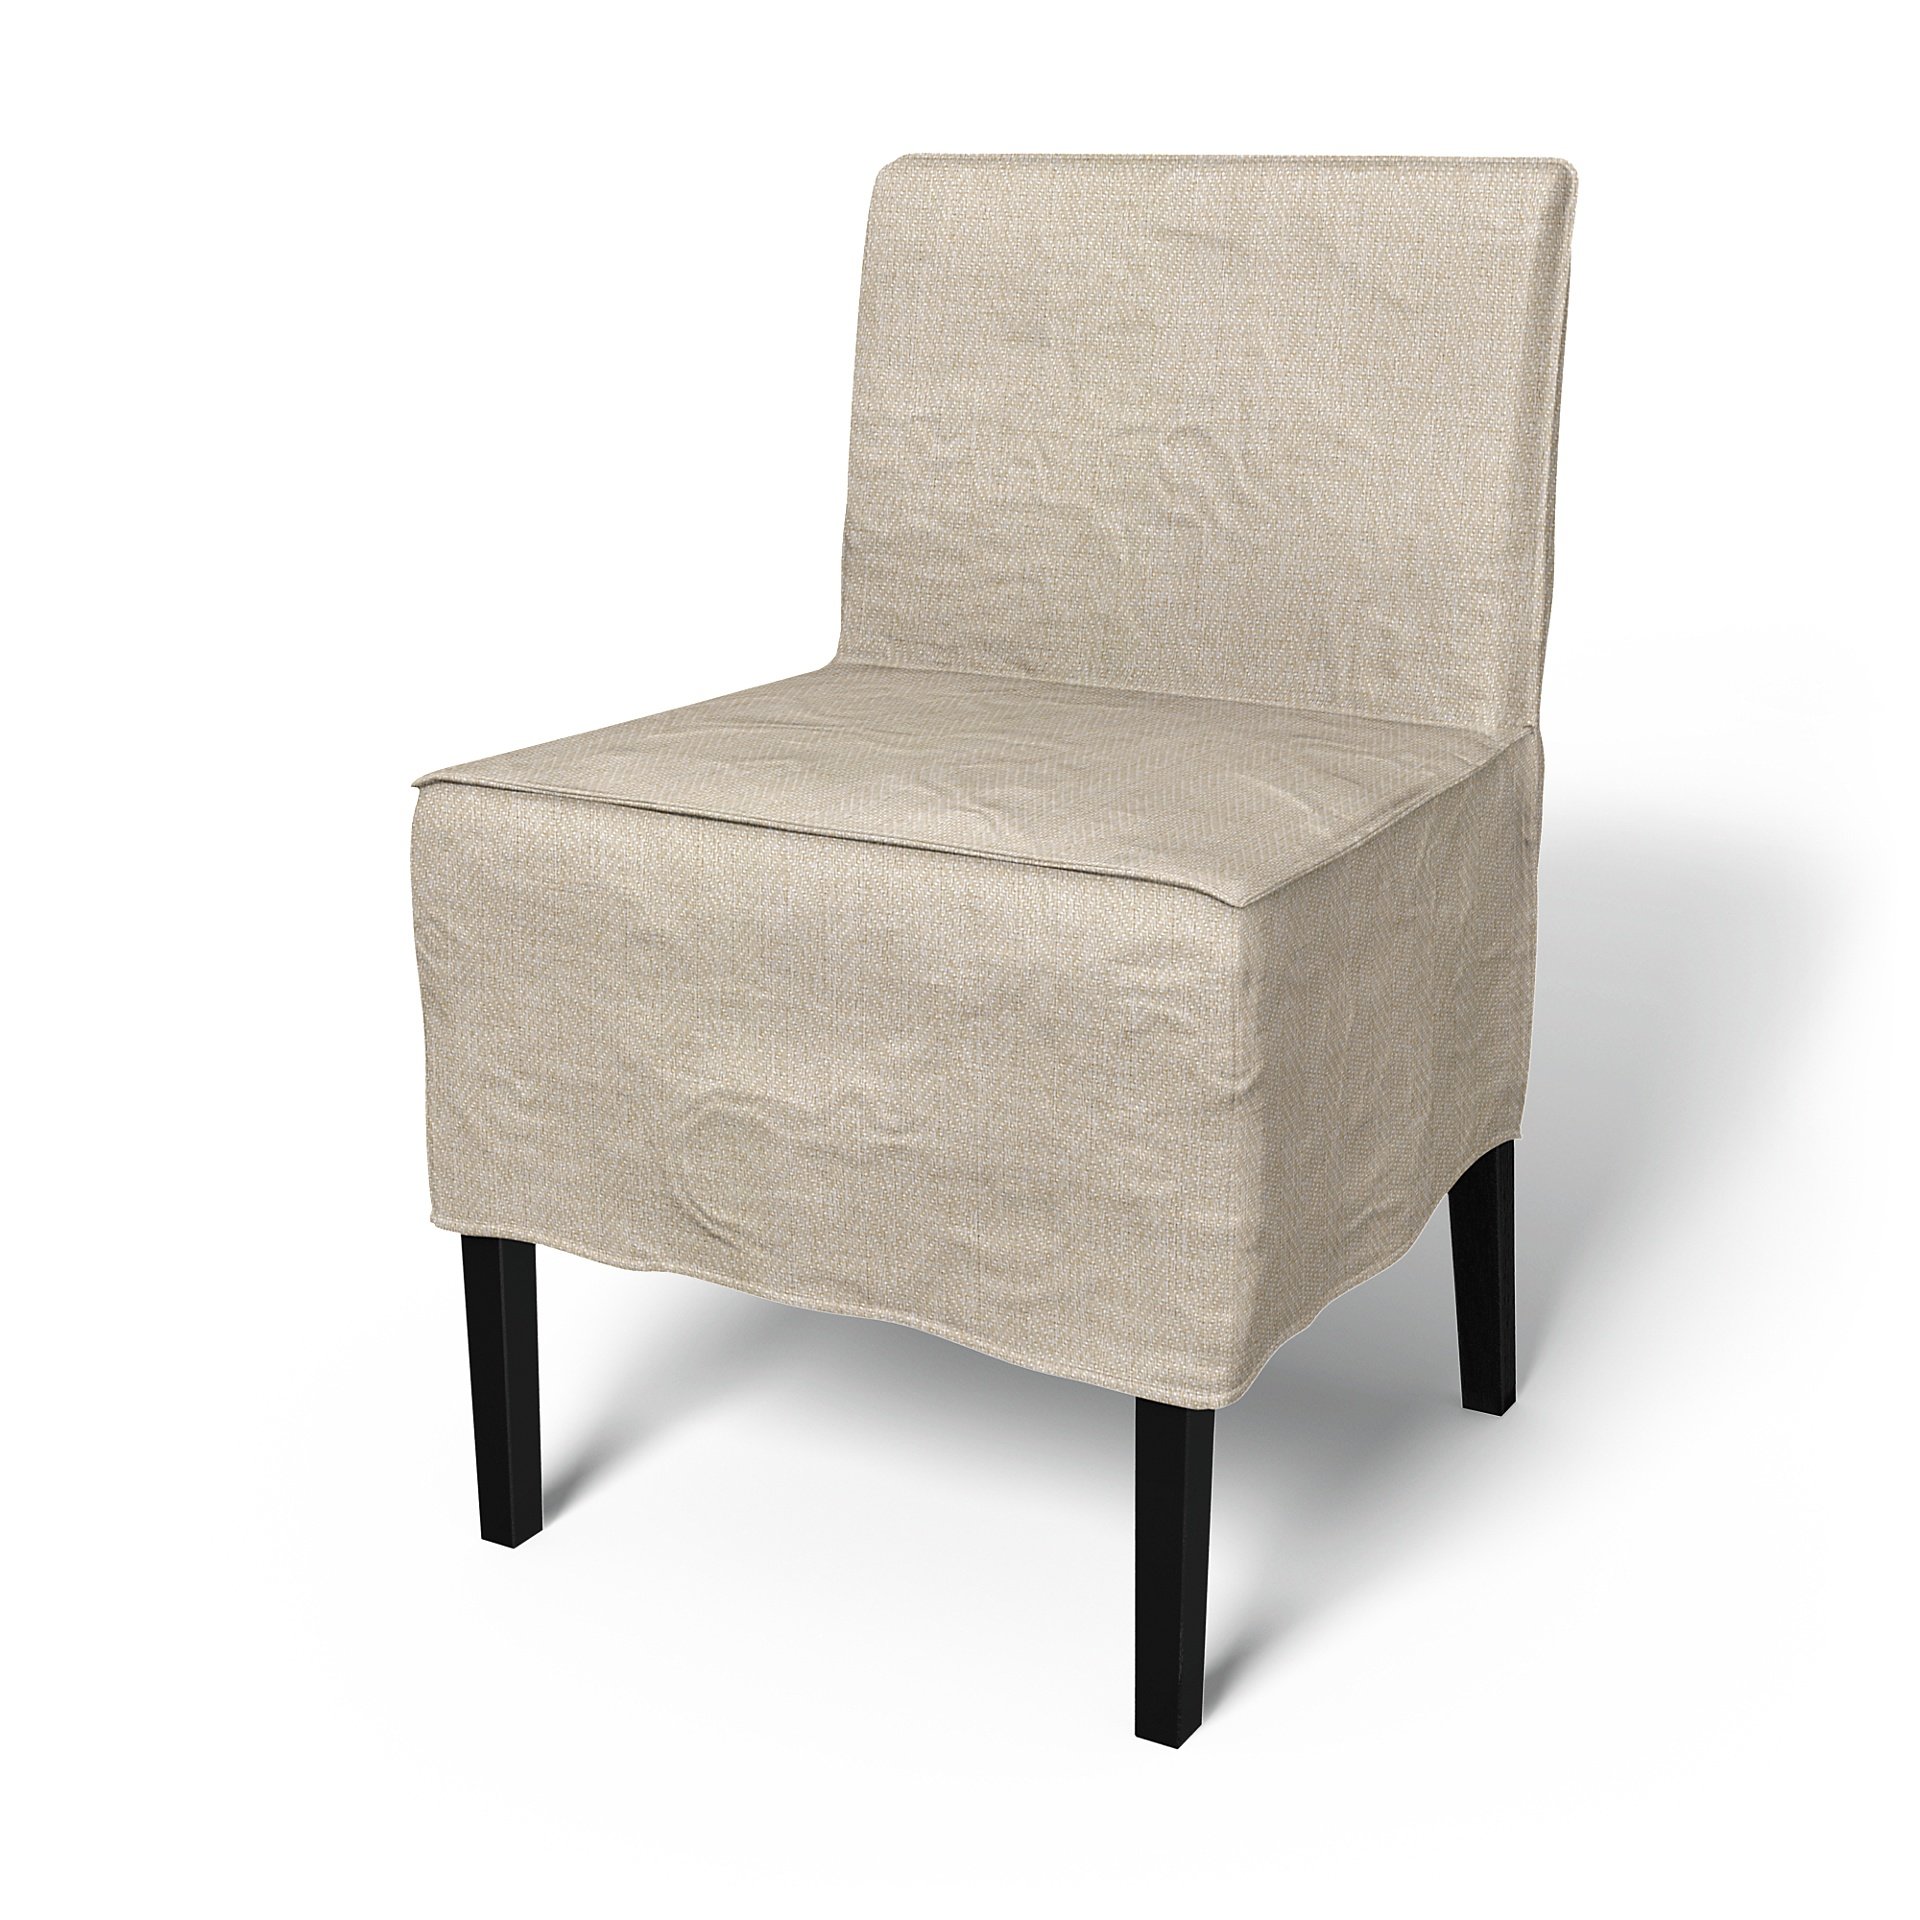 IKEA - Nils Dining Chair Cover, Natural, Boucle & Texture - Bemz